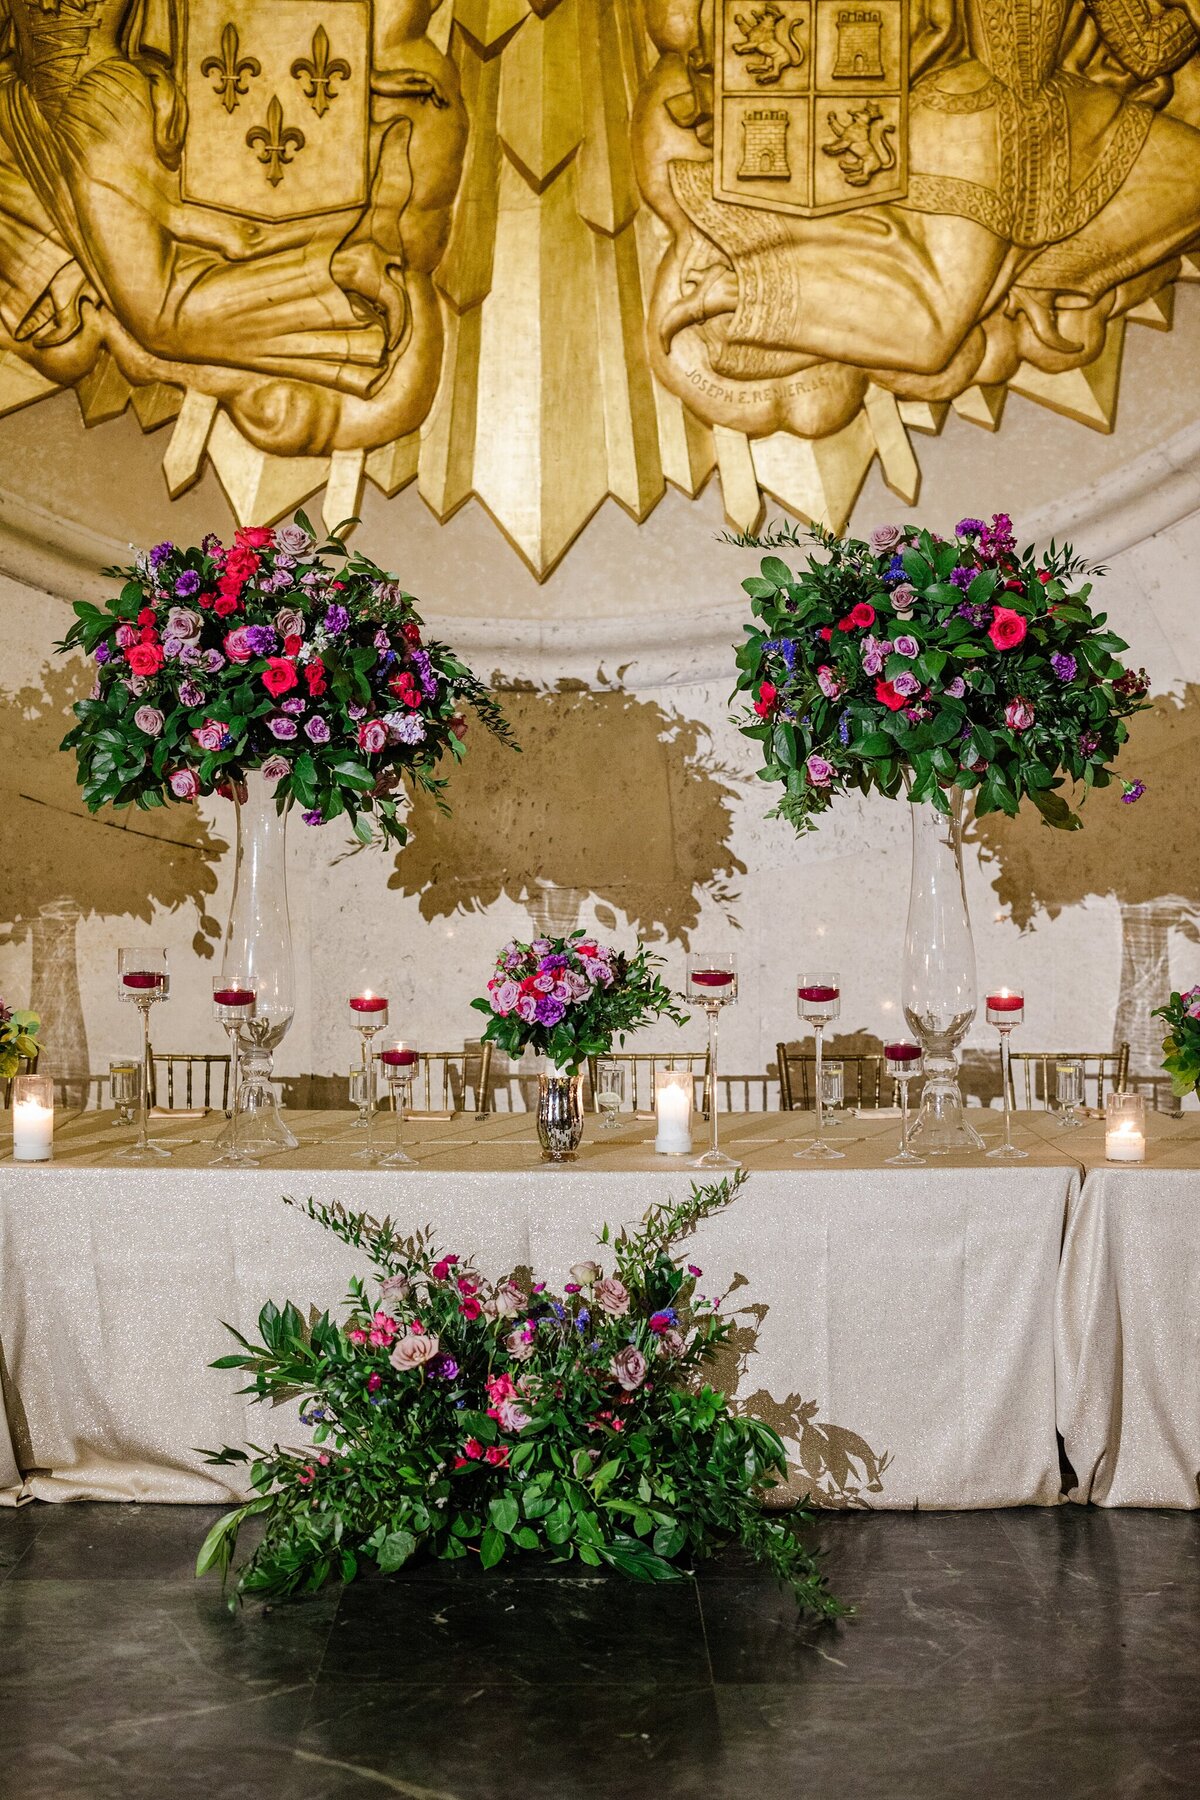 A detail shot of the head table at a wedding reception at the Hall of State at Fair Park in Dallas, Texas. The long, rectangular table is draped in with a tablecloth and covered with many candles and large floral arrangements in tall, glass vases. A large floral arrangement sits in front of the table on the ground and a large, gold crest adorns the wall behind the table.